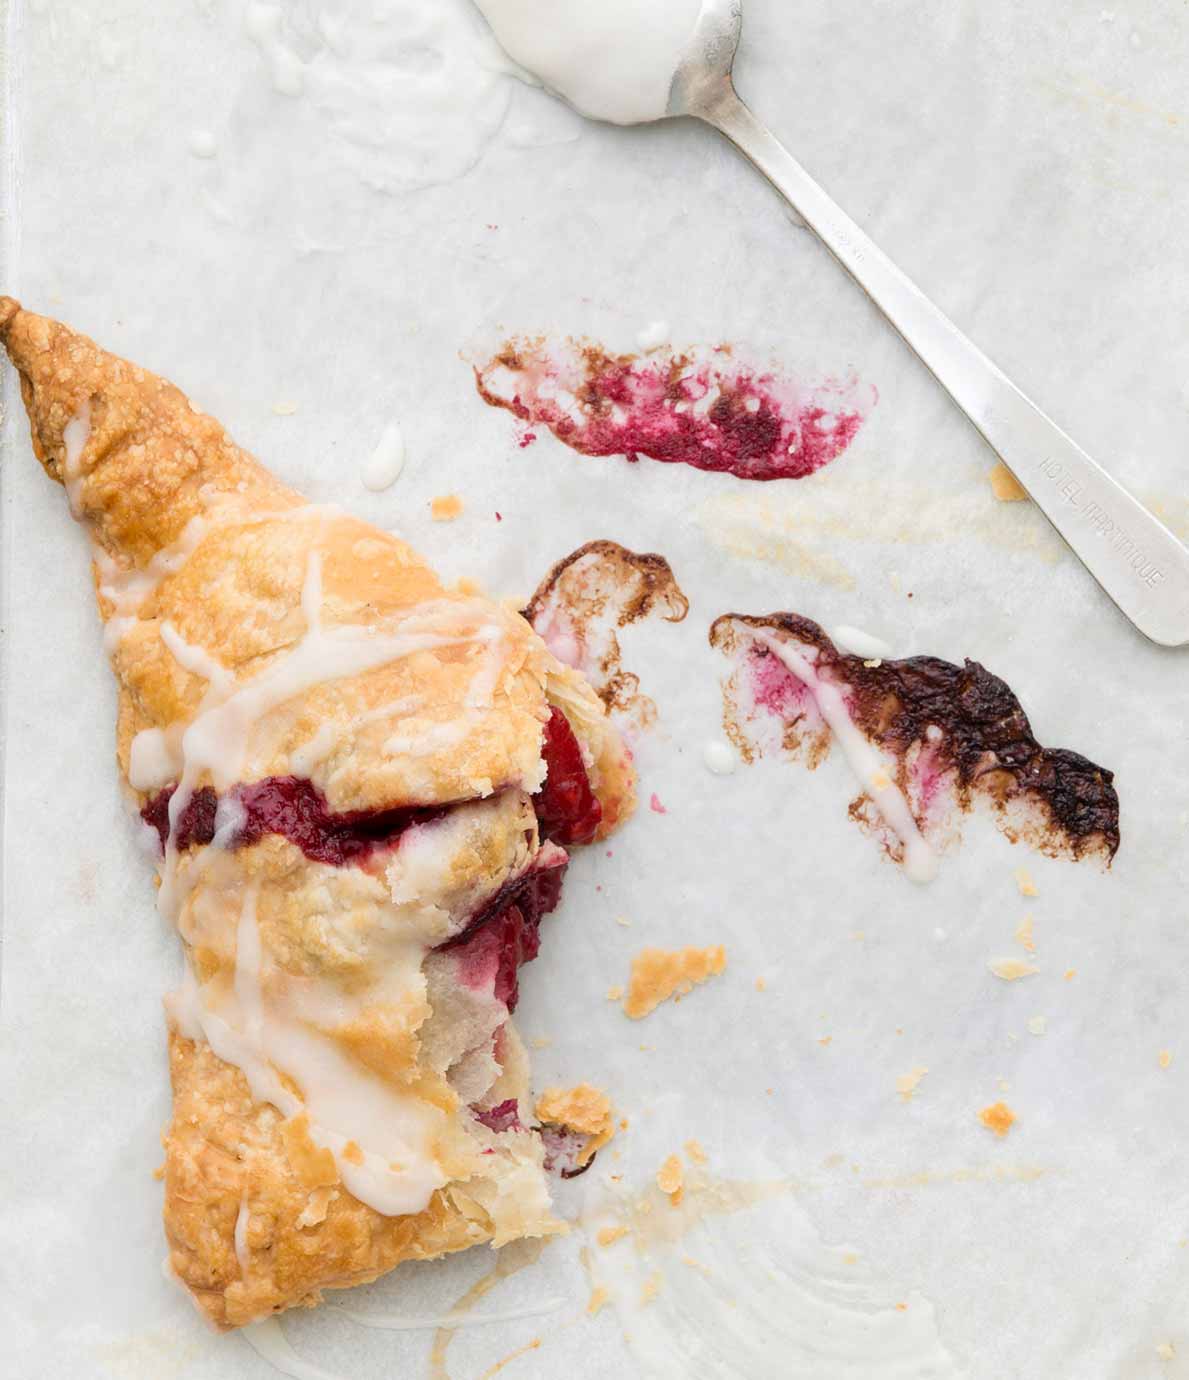 A fruit-filled Puff Pastry Turnover with a corner bitten off and a spoon resting above the pastry.